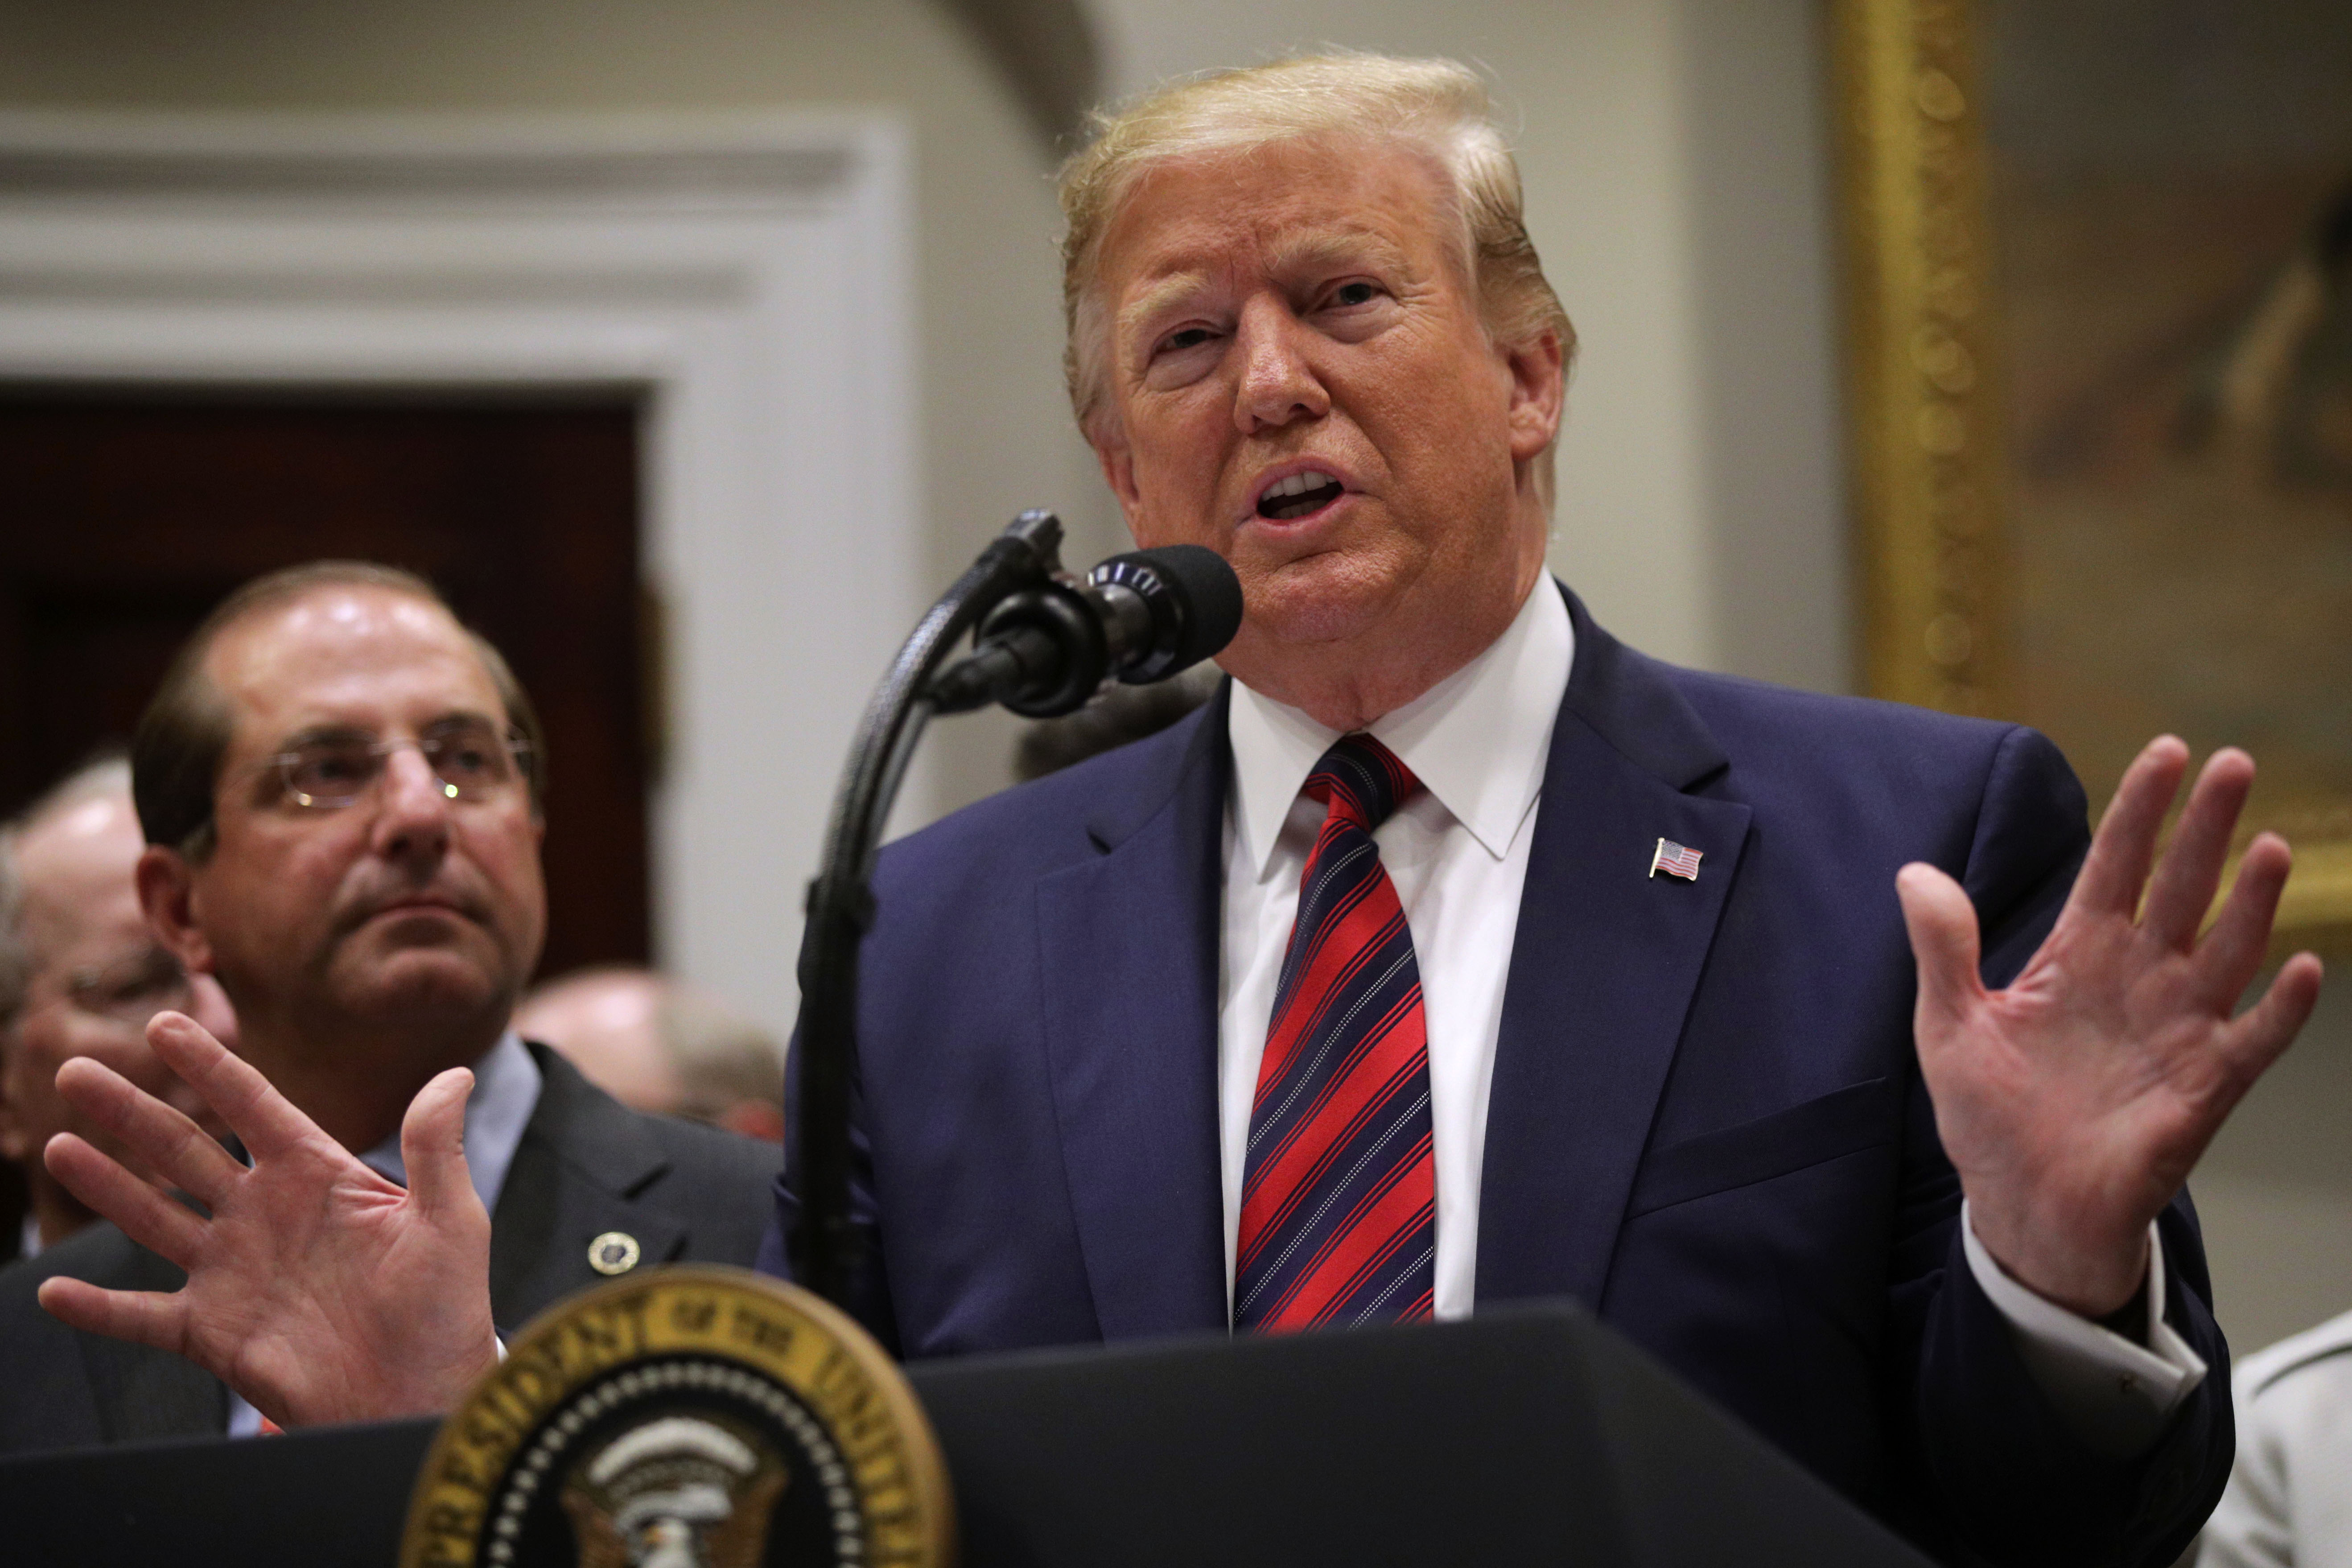 U.S. President Donald Trump speaks as Secretary of Health and Human Services Alex Azar listens during a Roosevelt Room event at the White House May 9, 2019 in Washington, DC. (Credit: Alex Wong/Getty Images)